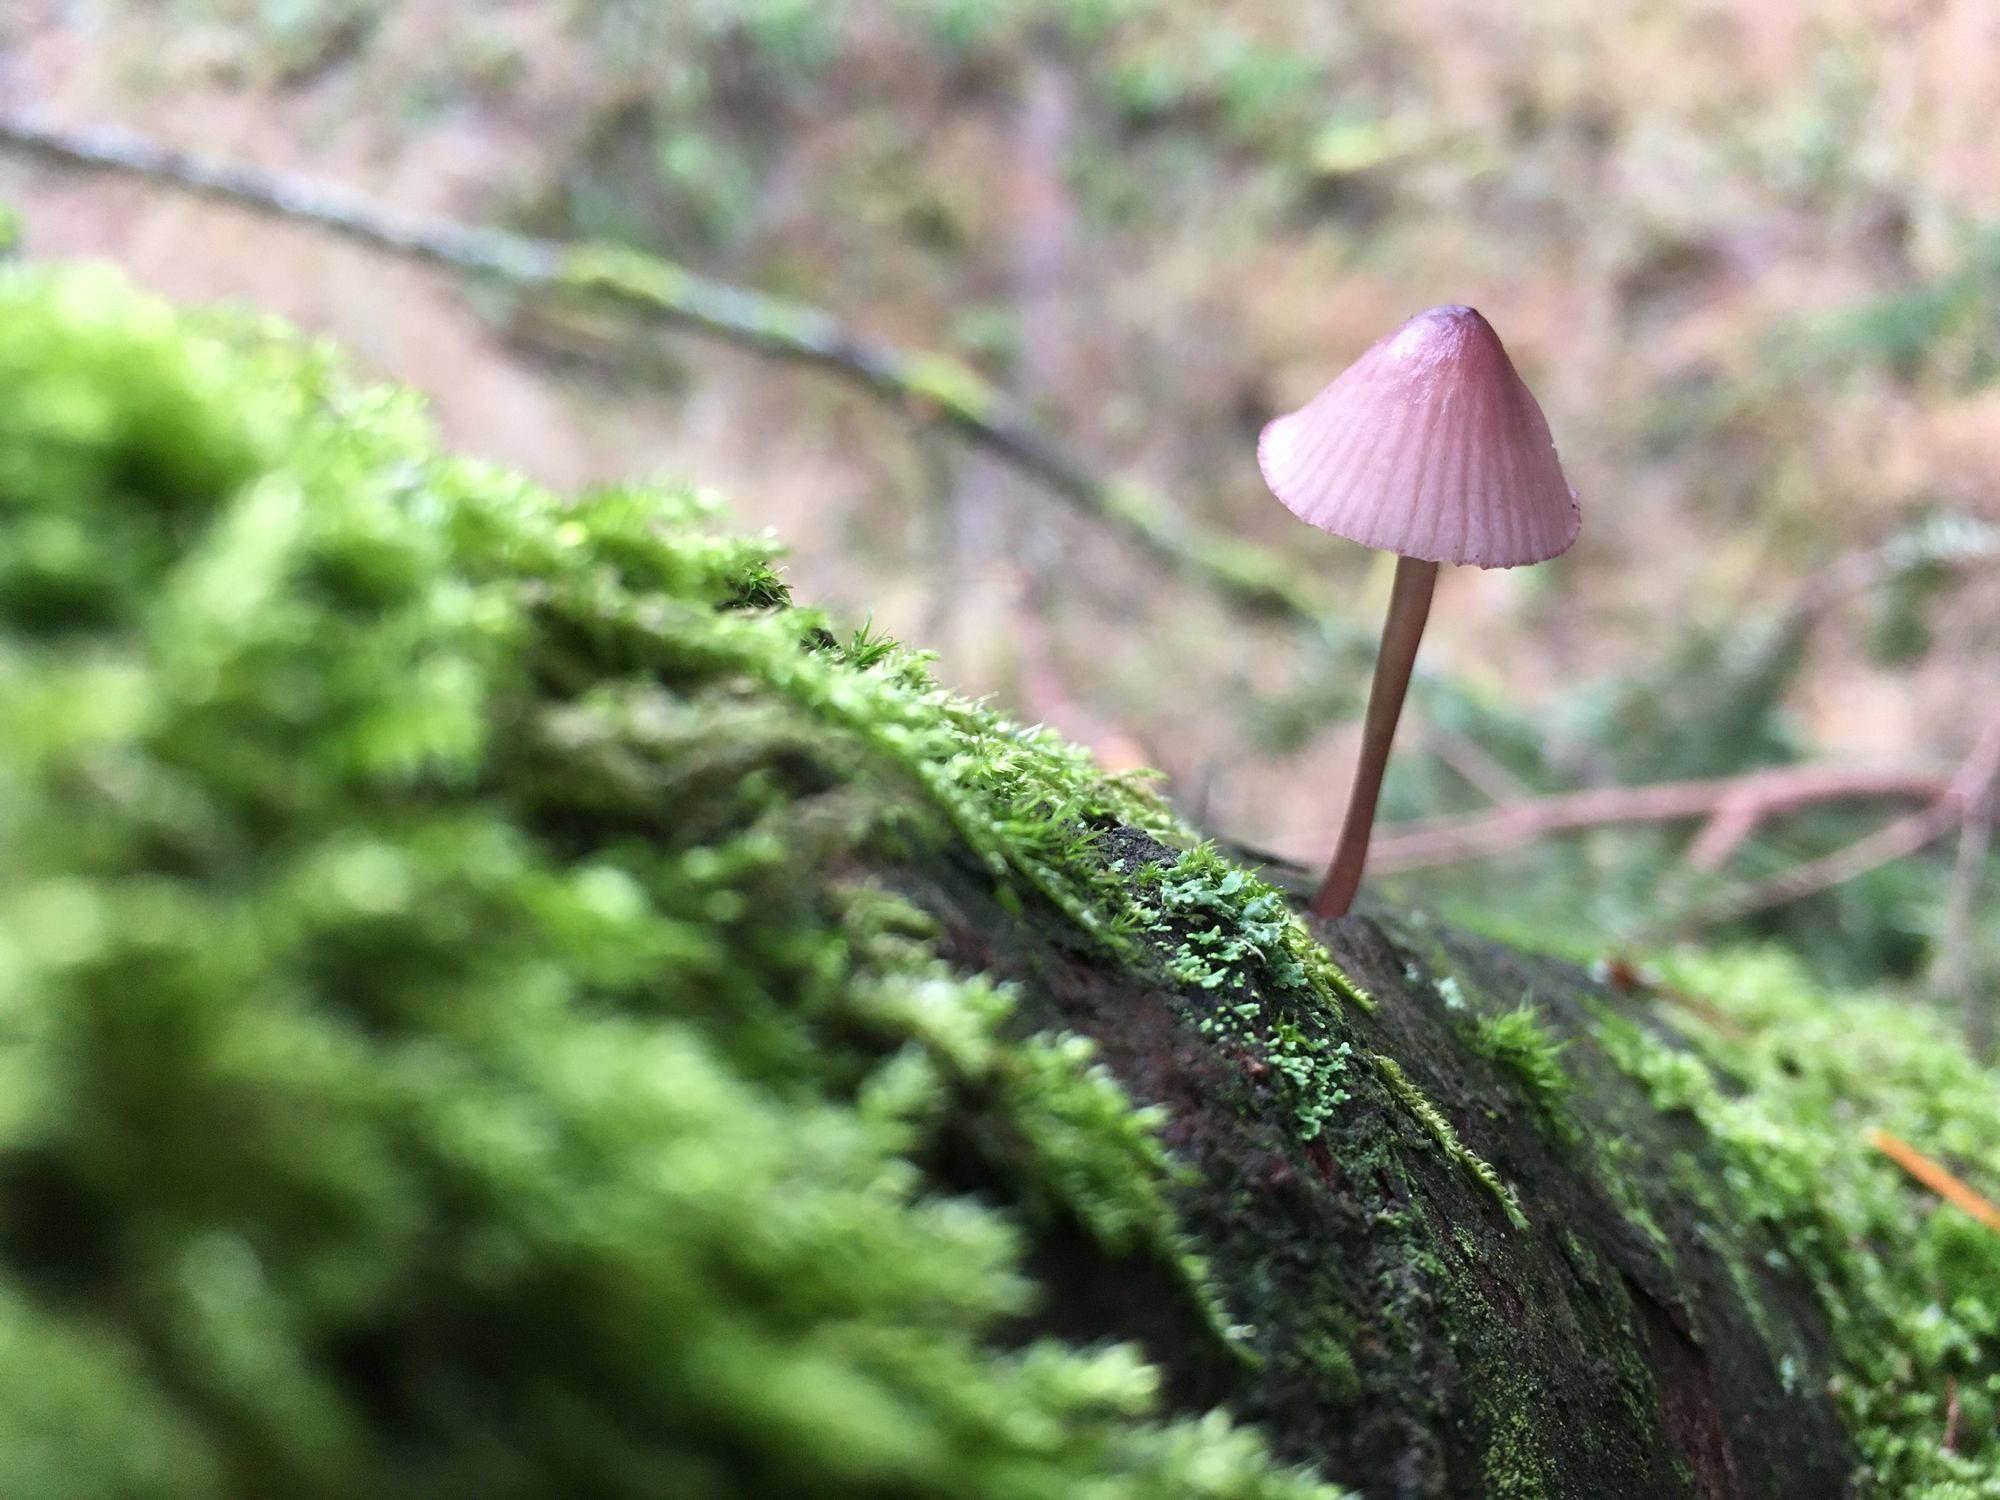 a close up of a tiny mushroom with a thin stalk and umbrella-like cap, growing on a moss covered log